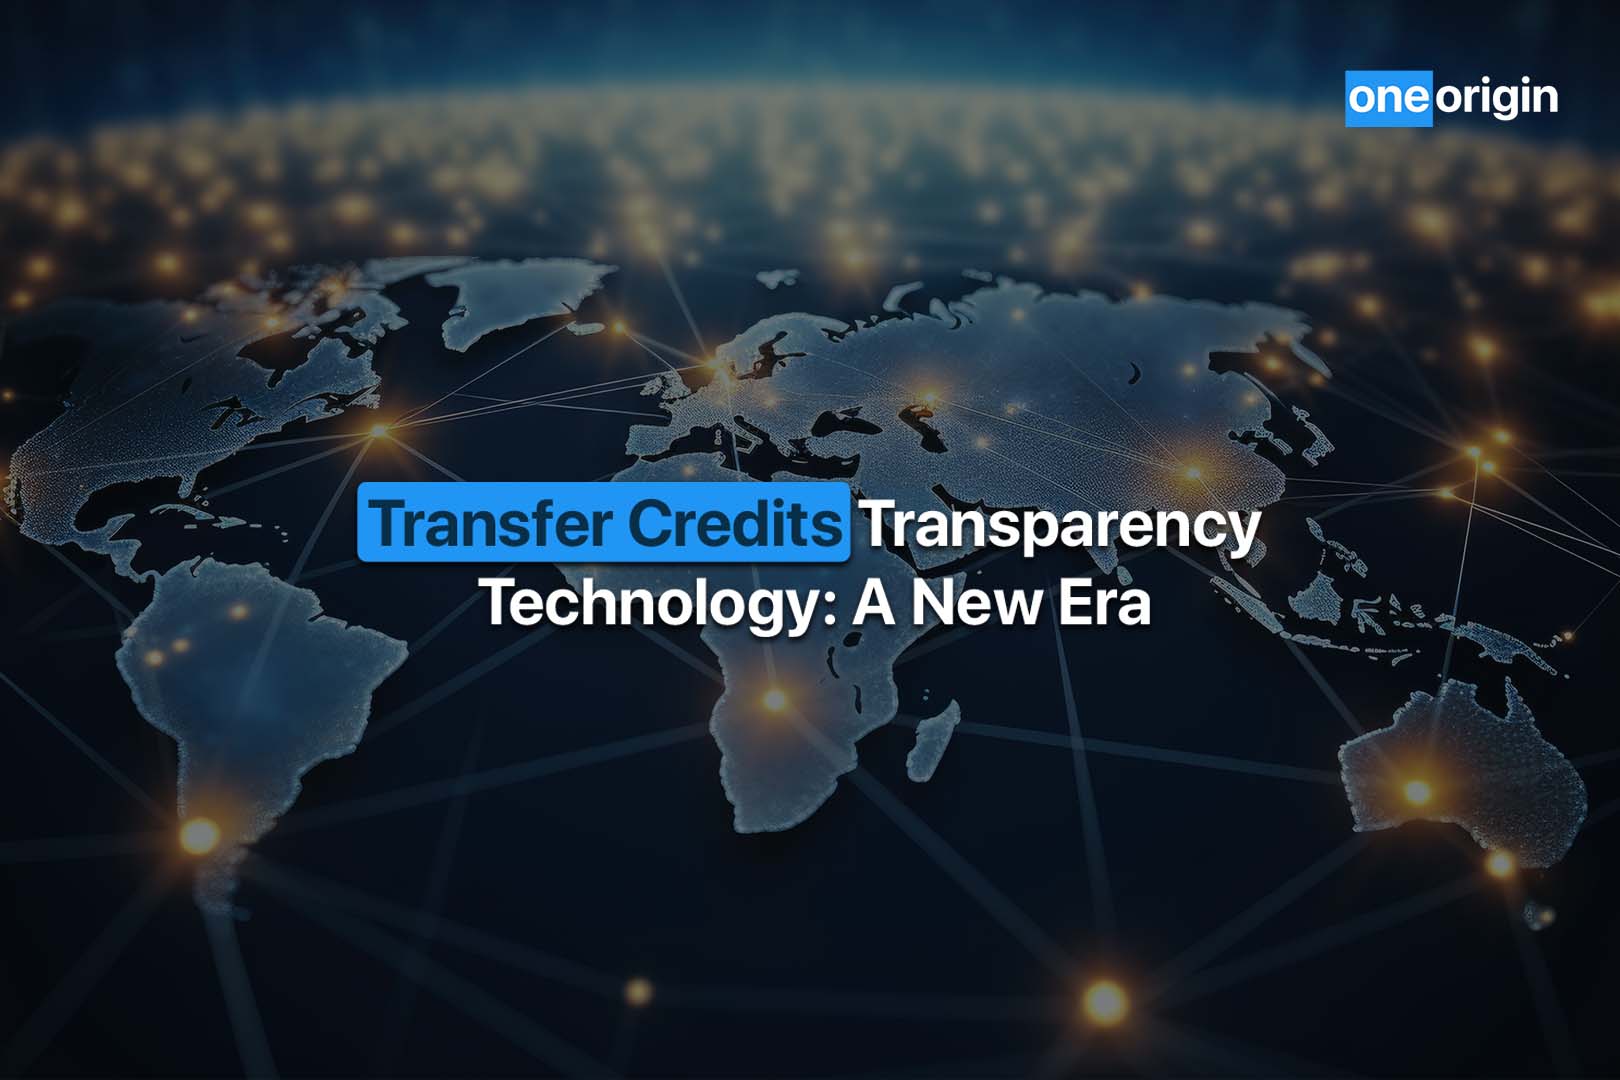 Transfer Credits Transparency Technology